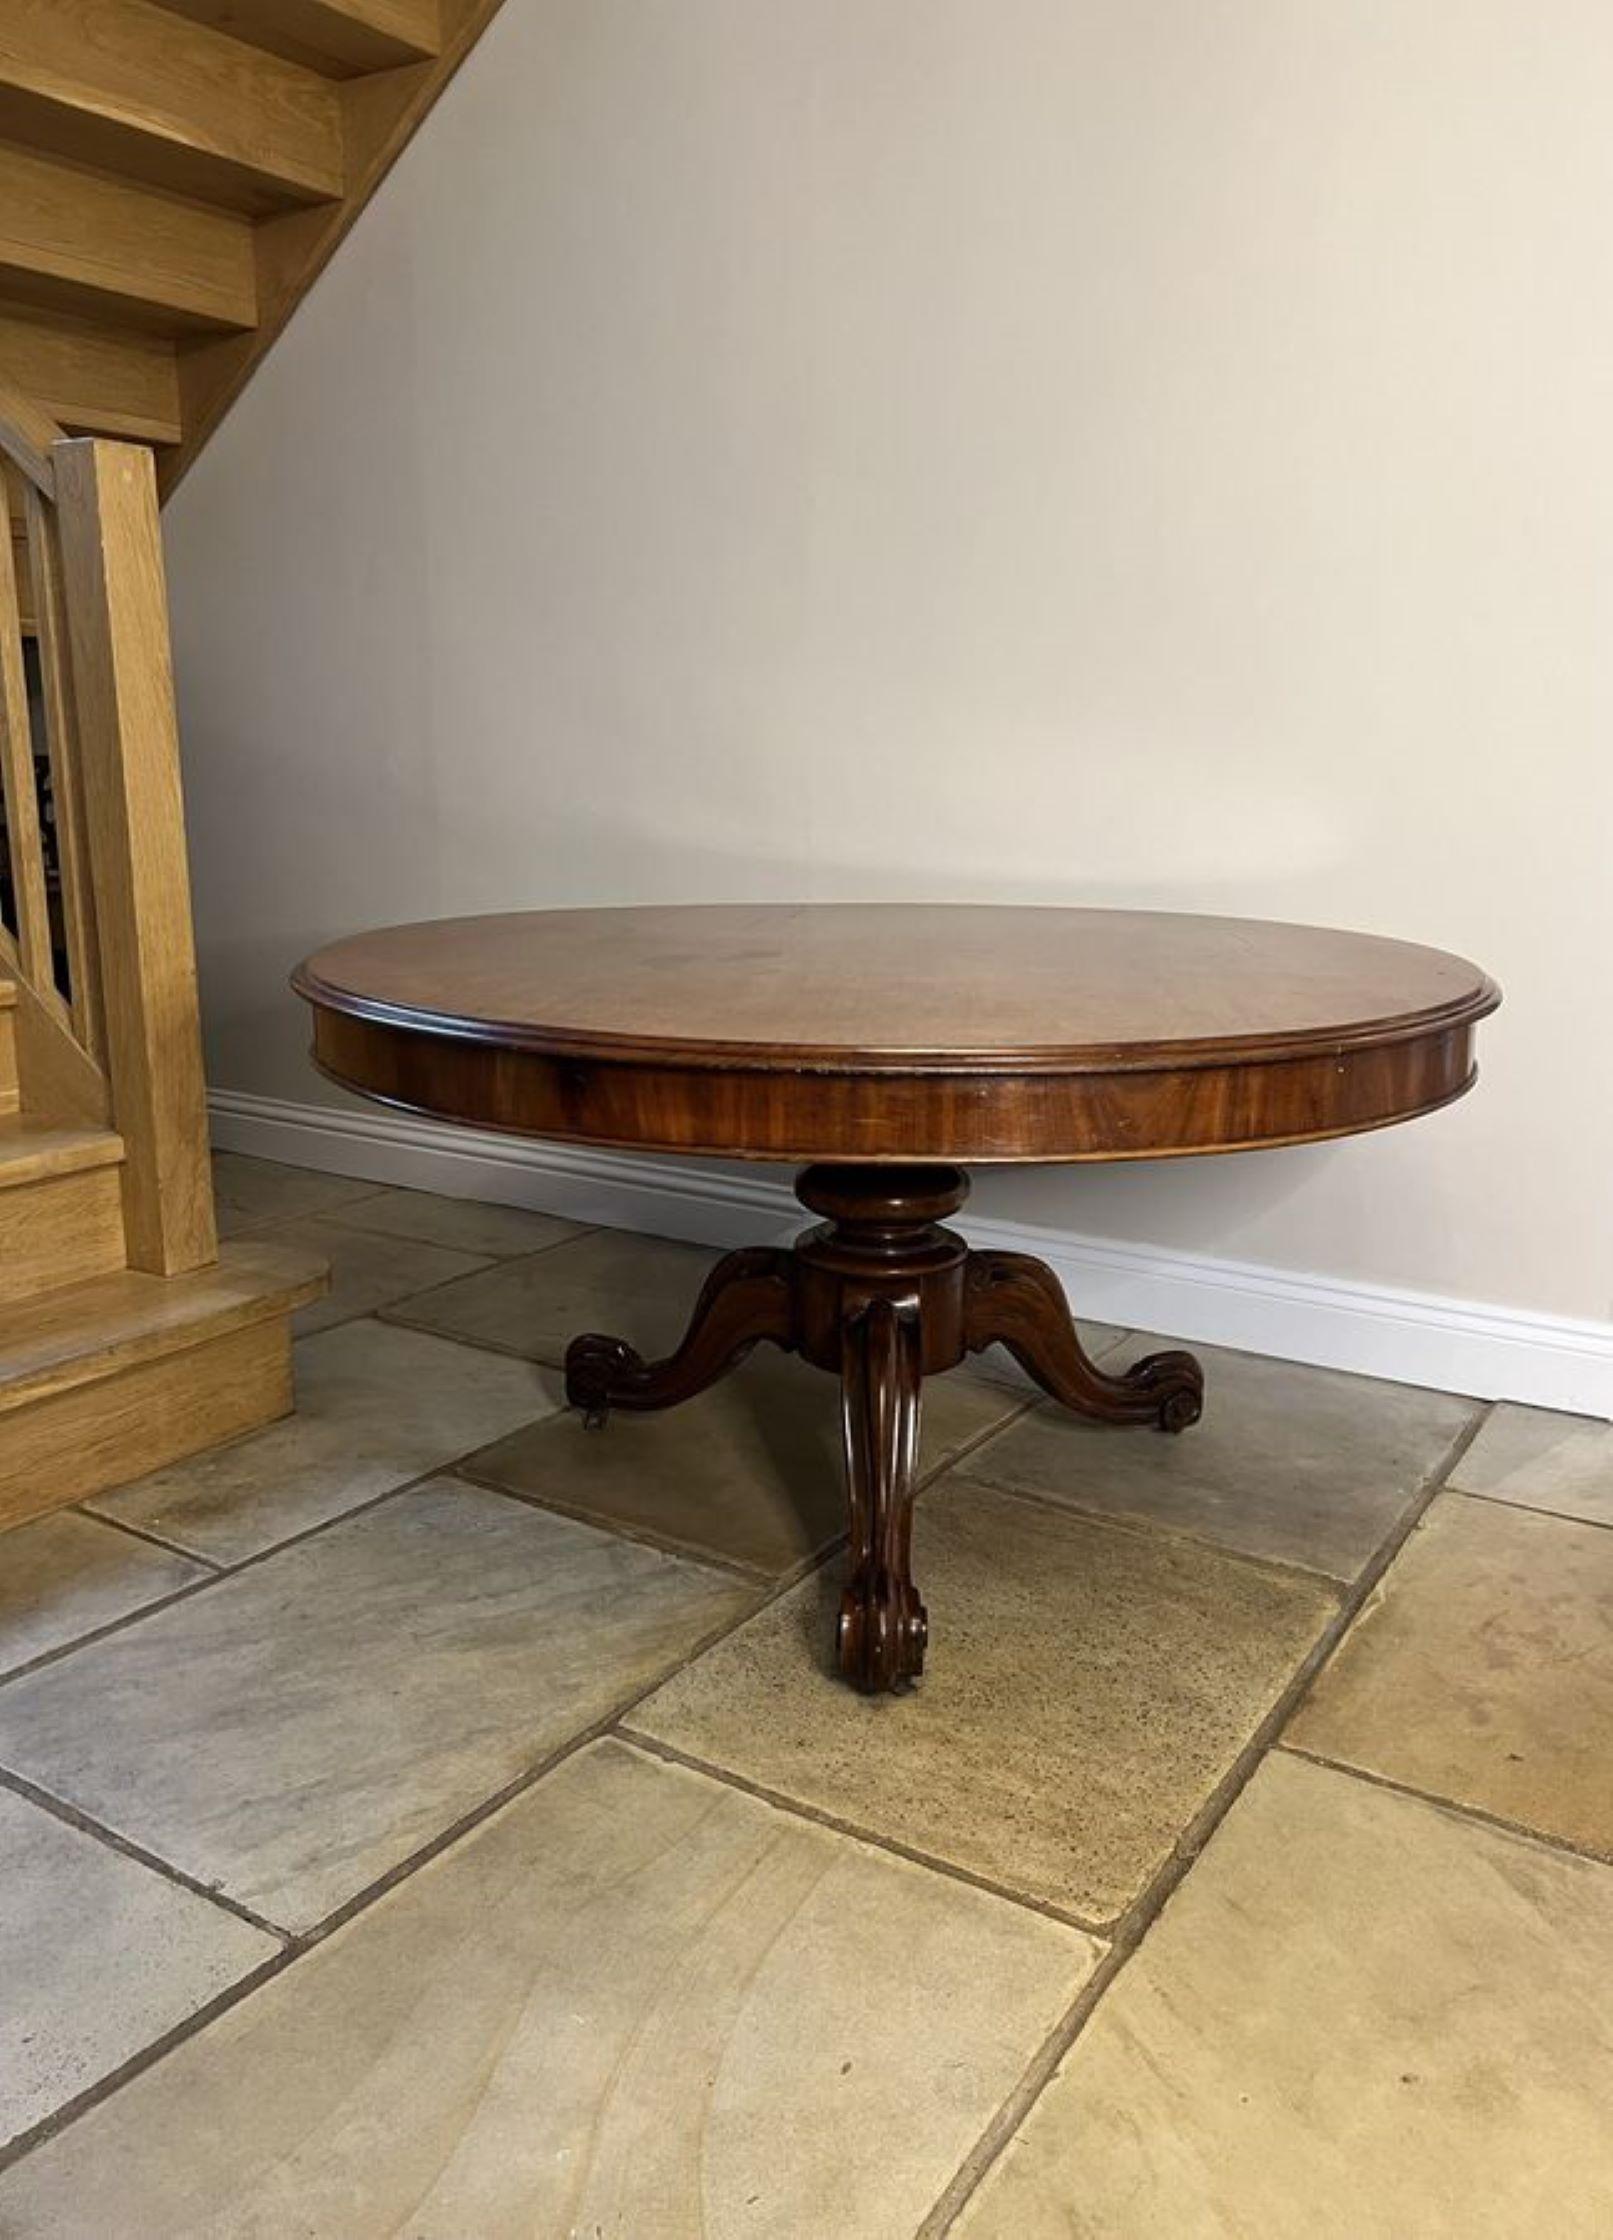 Antique Victorian quality mahogany large round dining table having a quality large mahogany circular top with a moulded edge supported on a turned pedestal column, standing on three shaped carved cabriole legs with the original casters.

D. 1860